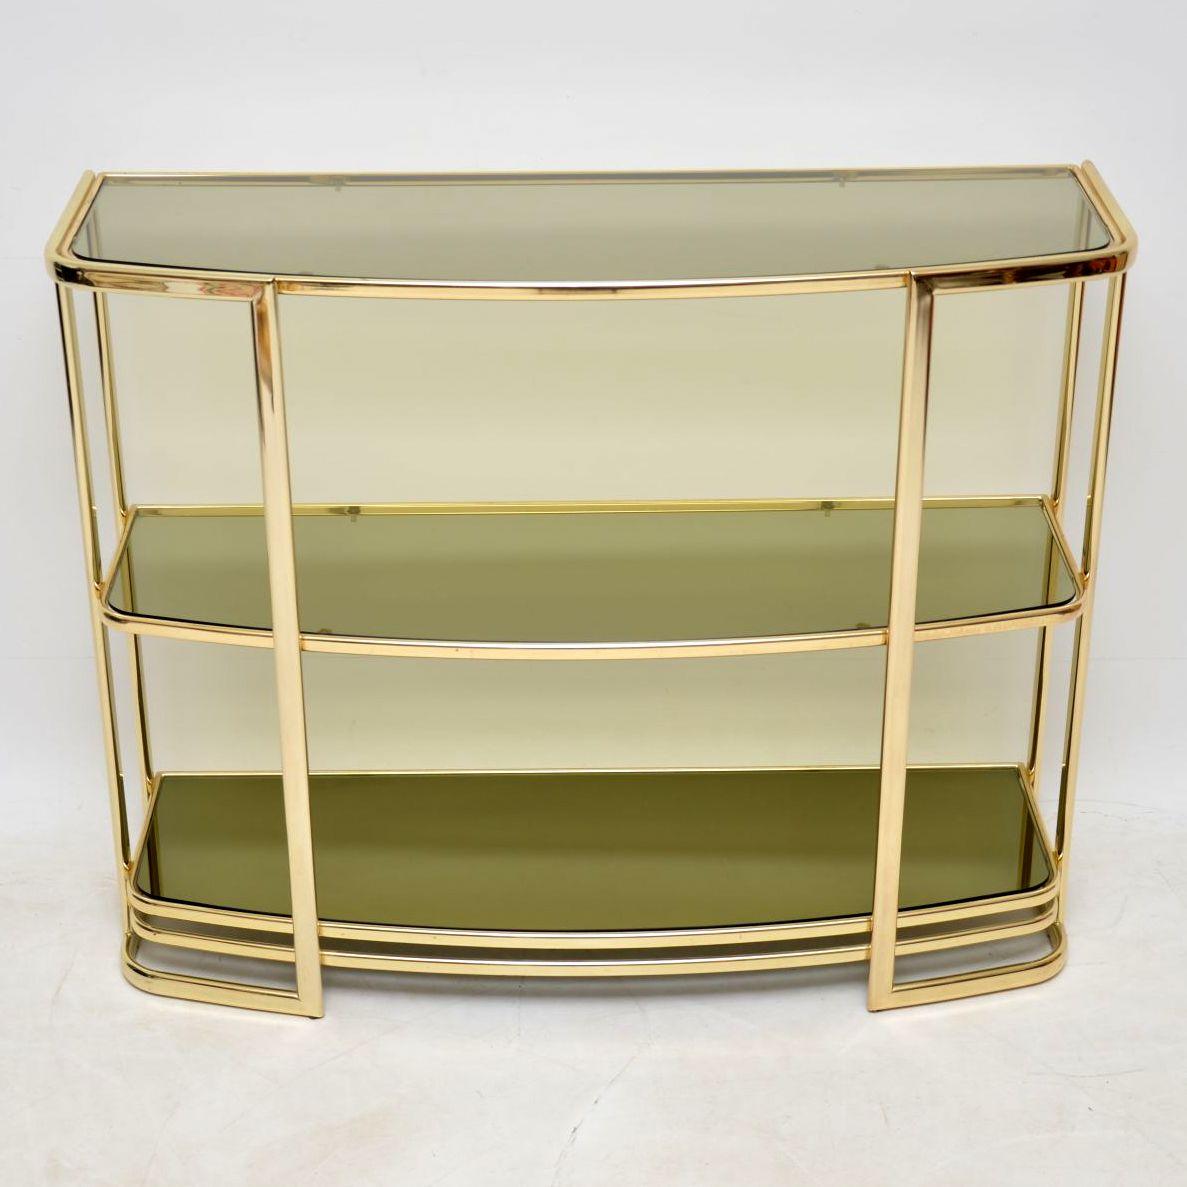 A beautiful and very well made vintage brass wall unit, this was made in Italy and it dates from around the 1970s. It’s in great condition for its age, with only some extremely minor wear here and there. It has two smoked glass upper shelves, and